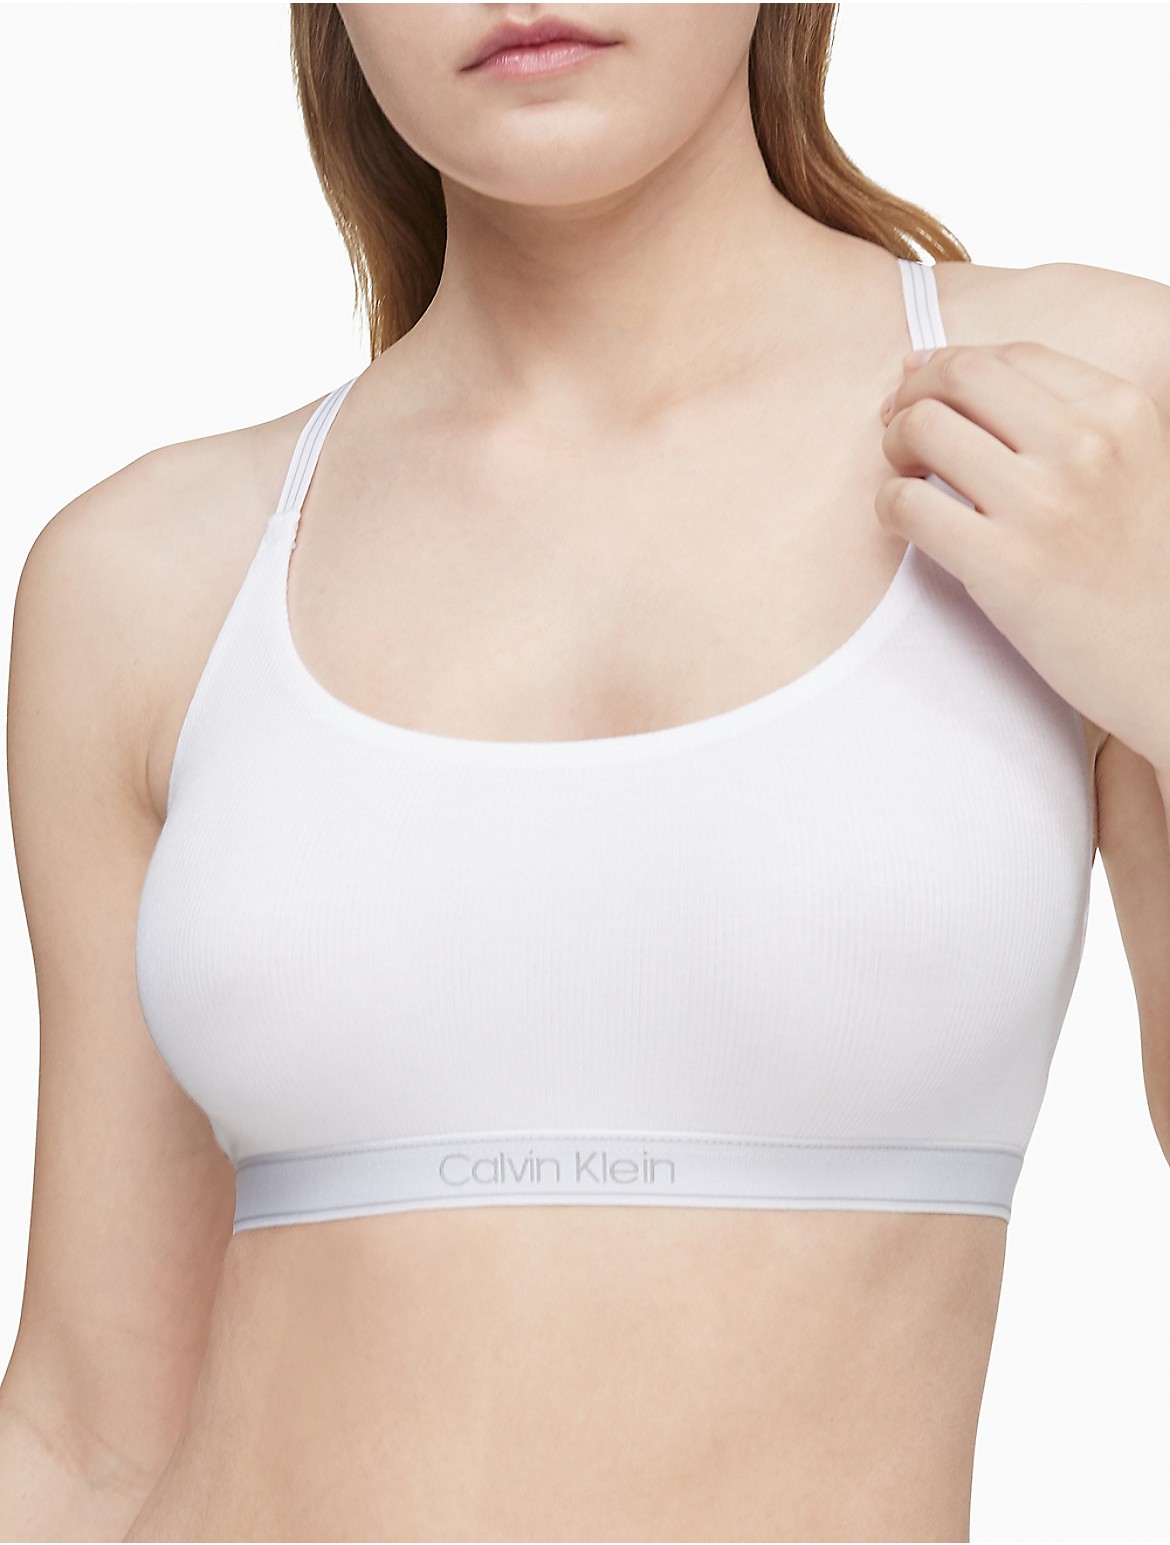 Calvin Klein Women's Pure Ribbed Unlined Bralette - White - XS